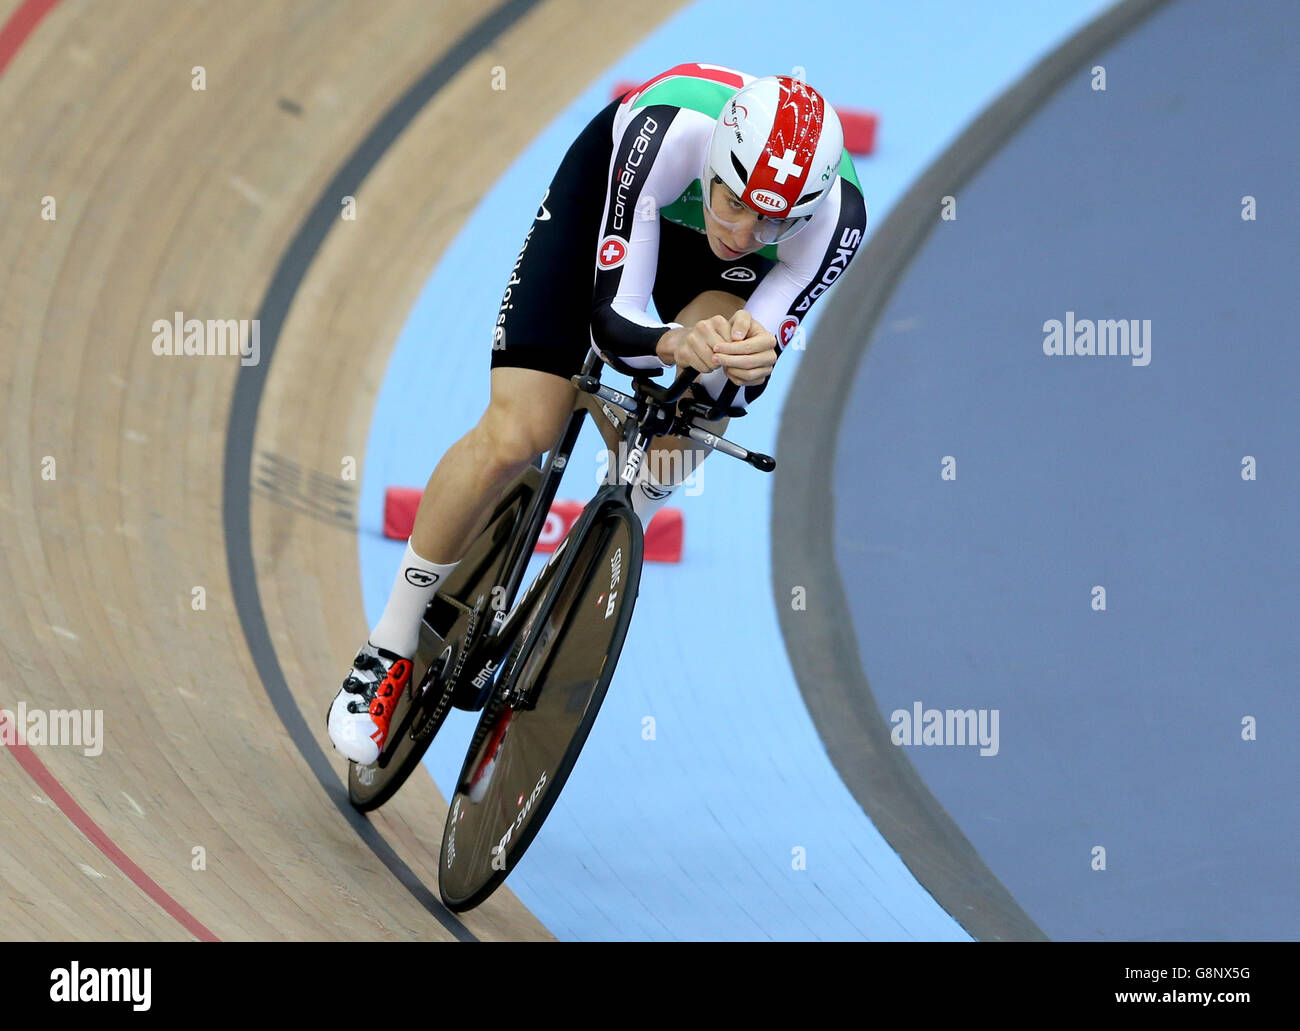 Switzerland's Frank Pasche competes in the Men's Individual Pursuit during day three of the UCI Track Cycling World Championships at Lee Valley VeloPark, London. PRESS ASSOCIATION Photo. Picture date: Friday March 4, 2016. See PA story CYCLING World. Photo credit should read: Tim Goode/PA Wire. Stock Photo